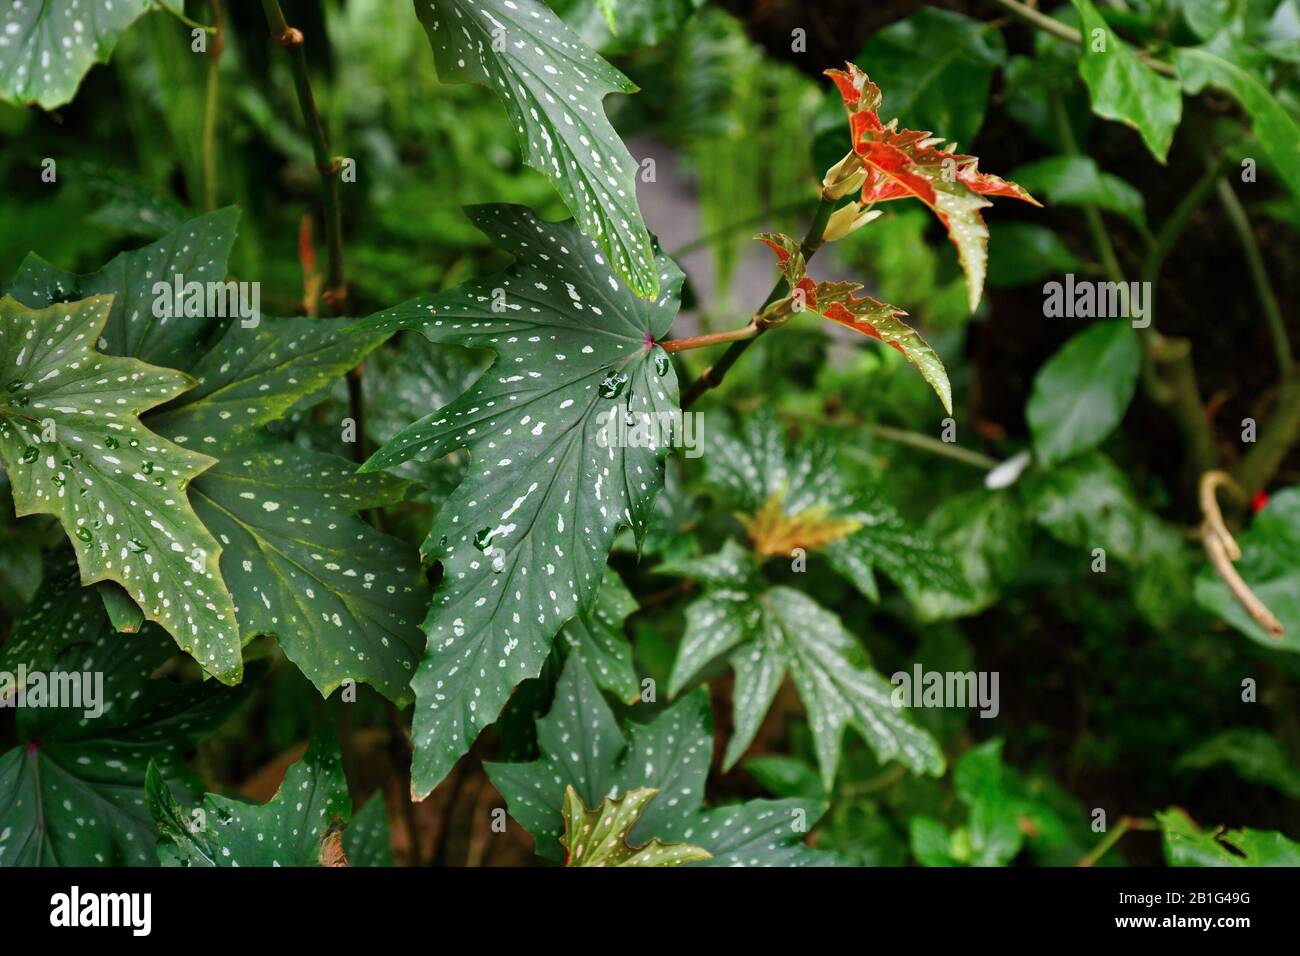 Tropical 'Begonia Aconitifolia' plant with deeply toothed to lobed leaves with white dots, endemic to Brazil Stock Photo